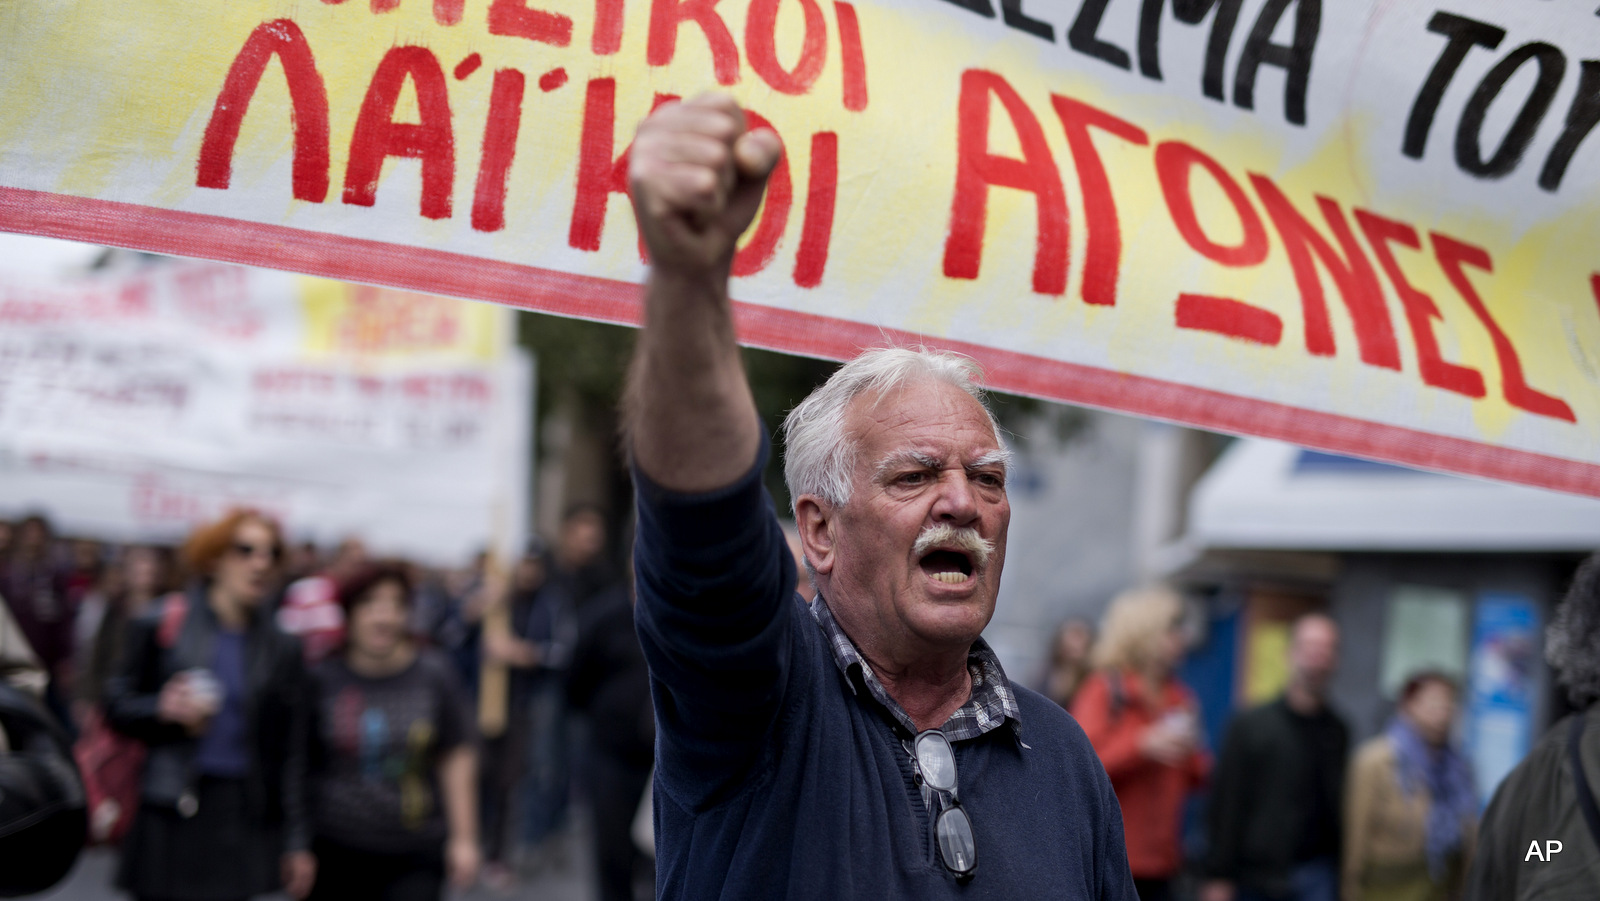 A protester chants anti austerity slogans during a demonstration in central Athens, on Friday, May 6, 2016. A protester chants anti austerity slogans during a demonstration in central Athens, on Friday, May 6, 2016. 